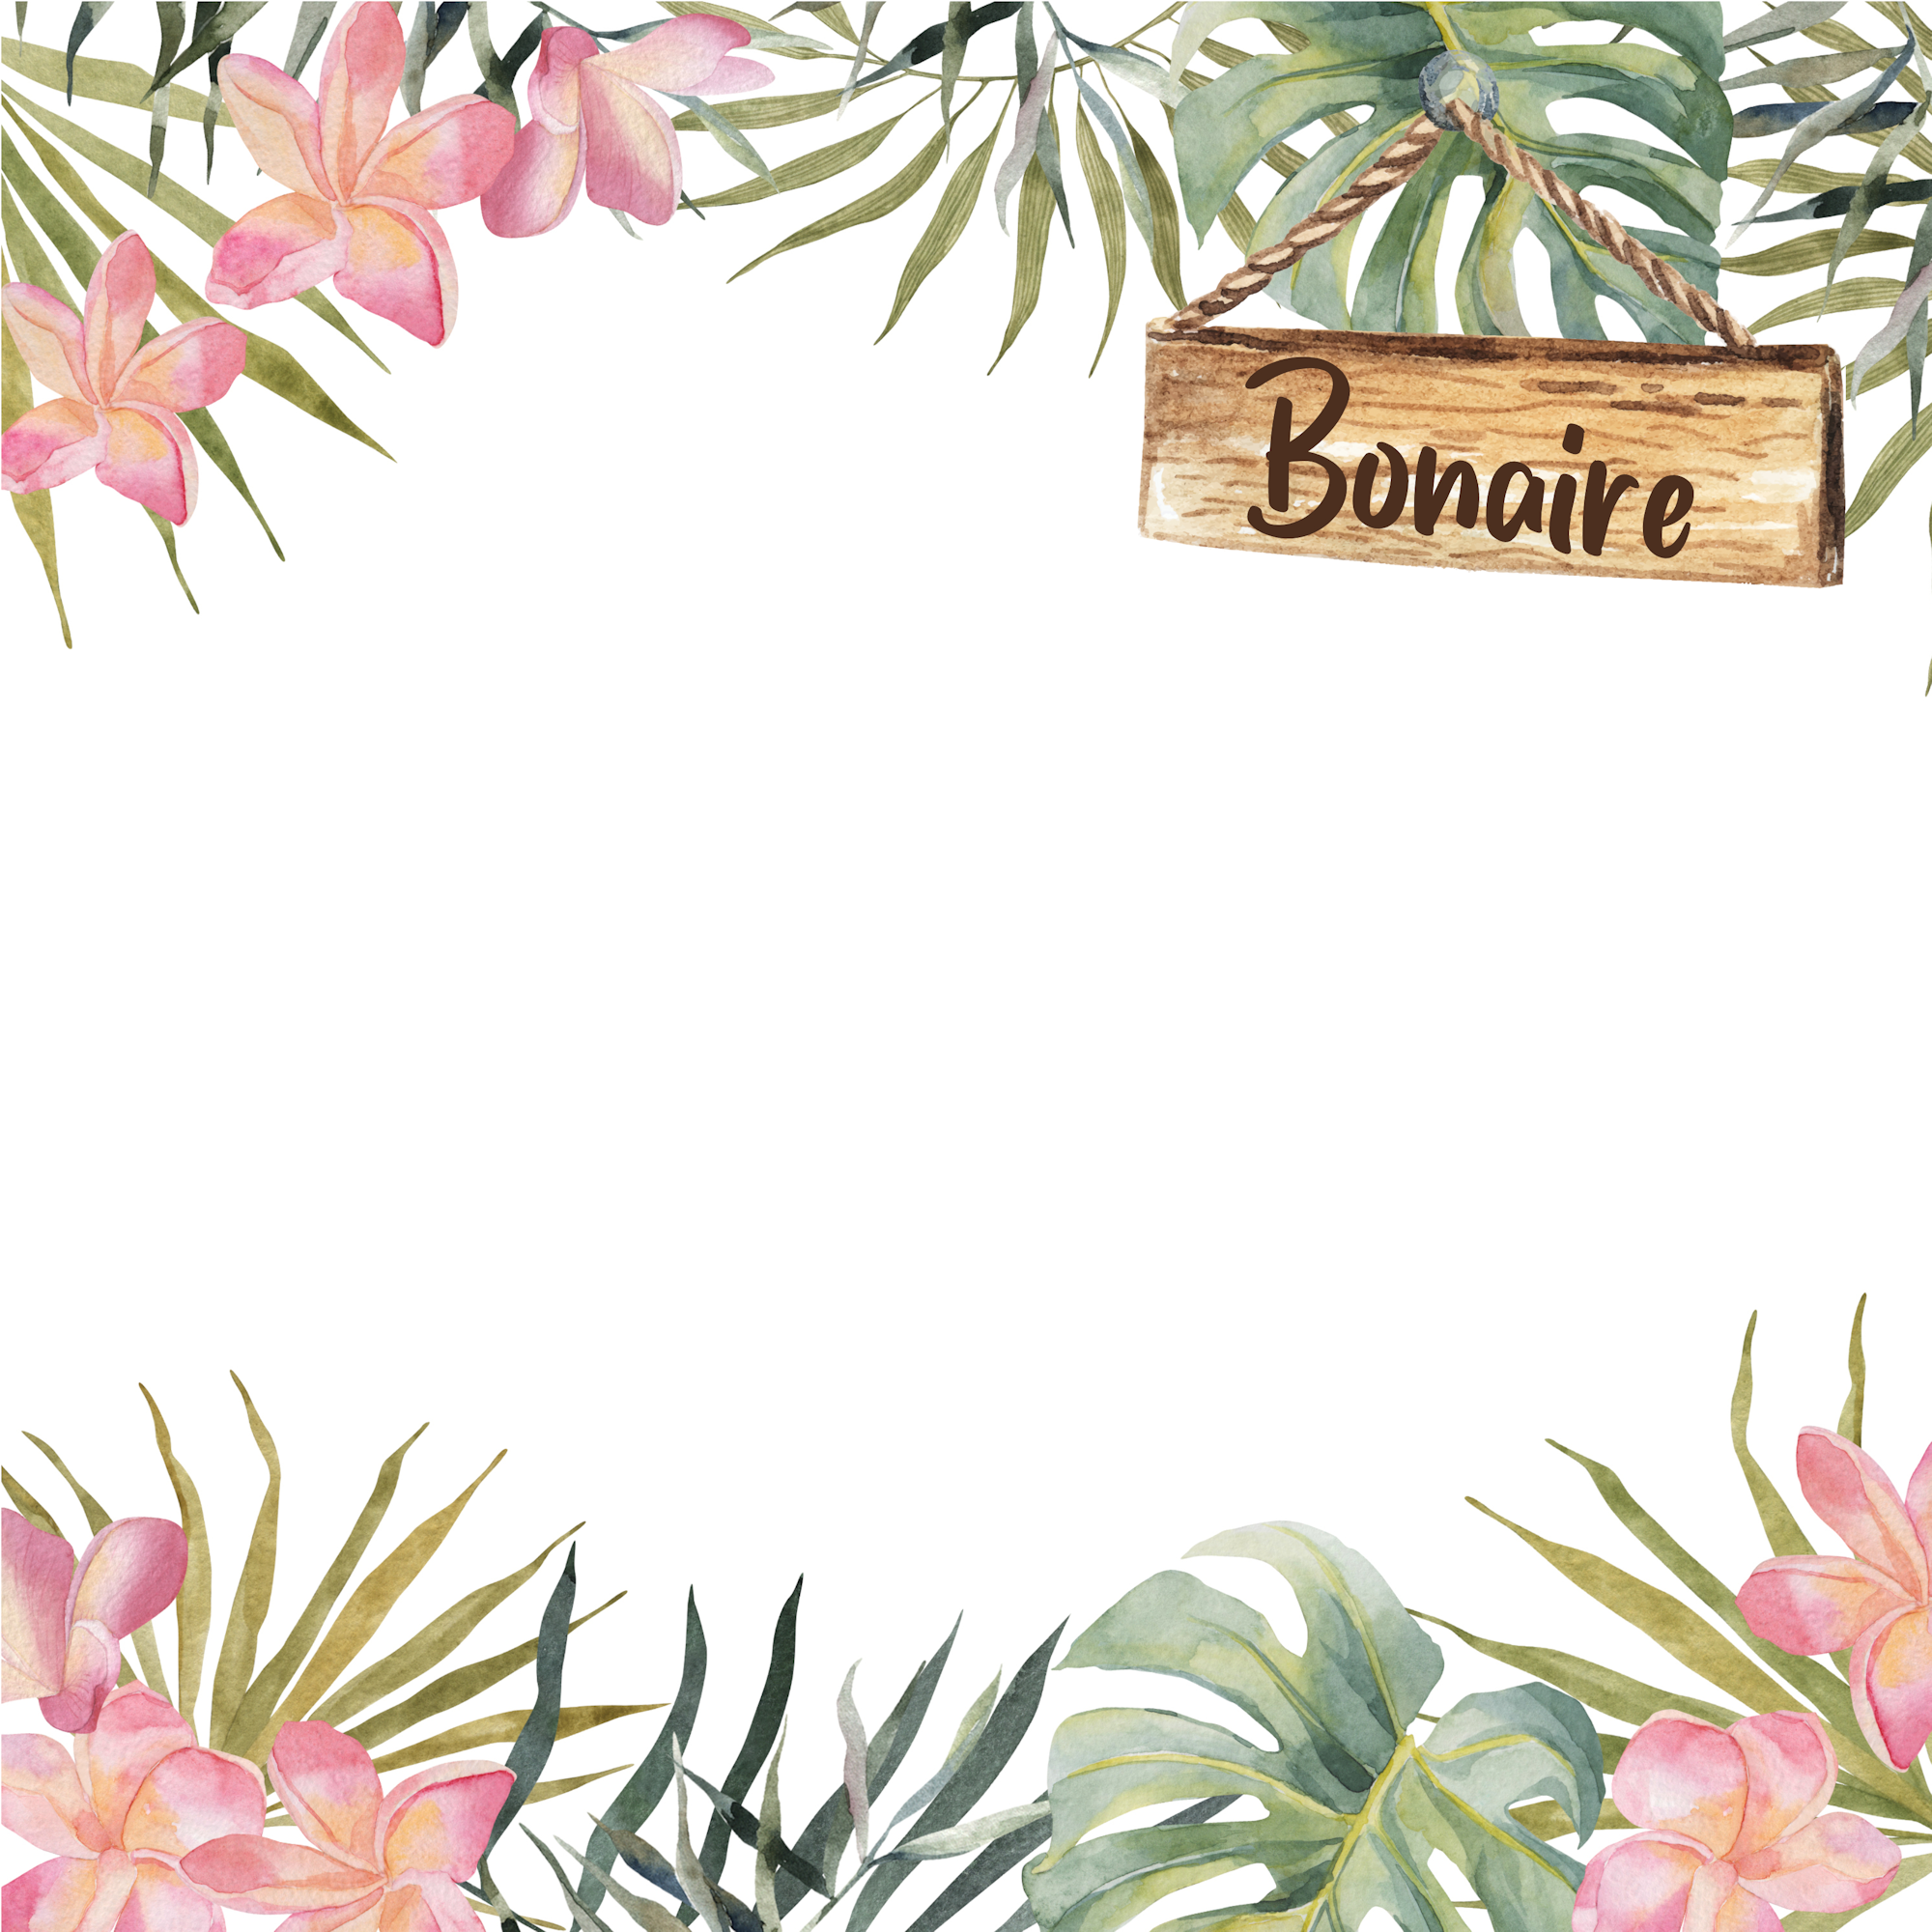 Tropical Paradise Collection Bonaire 12 x 12 Double-Sided Scrapbook Paper by SSC Designs